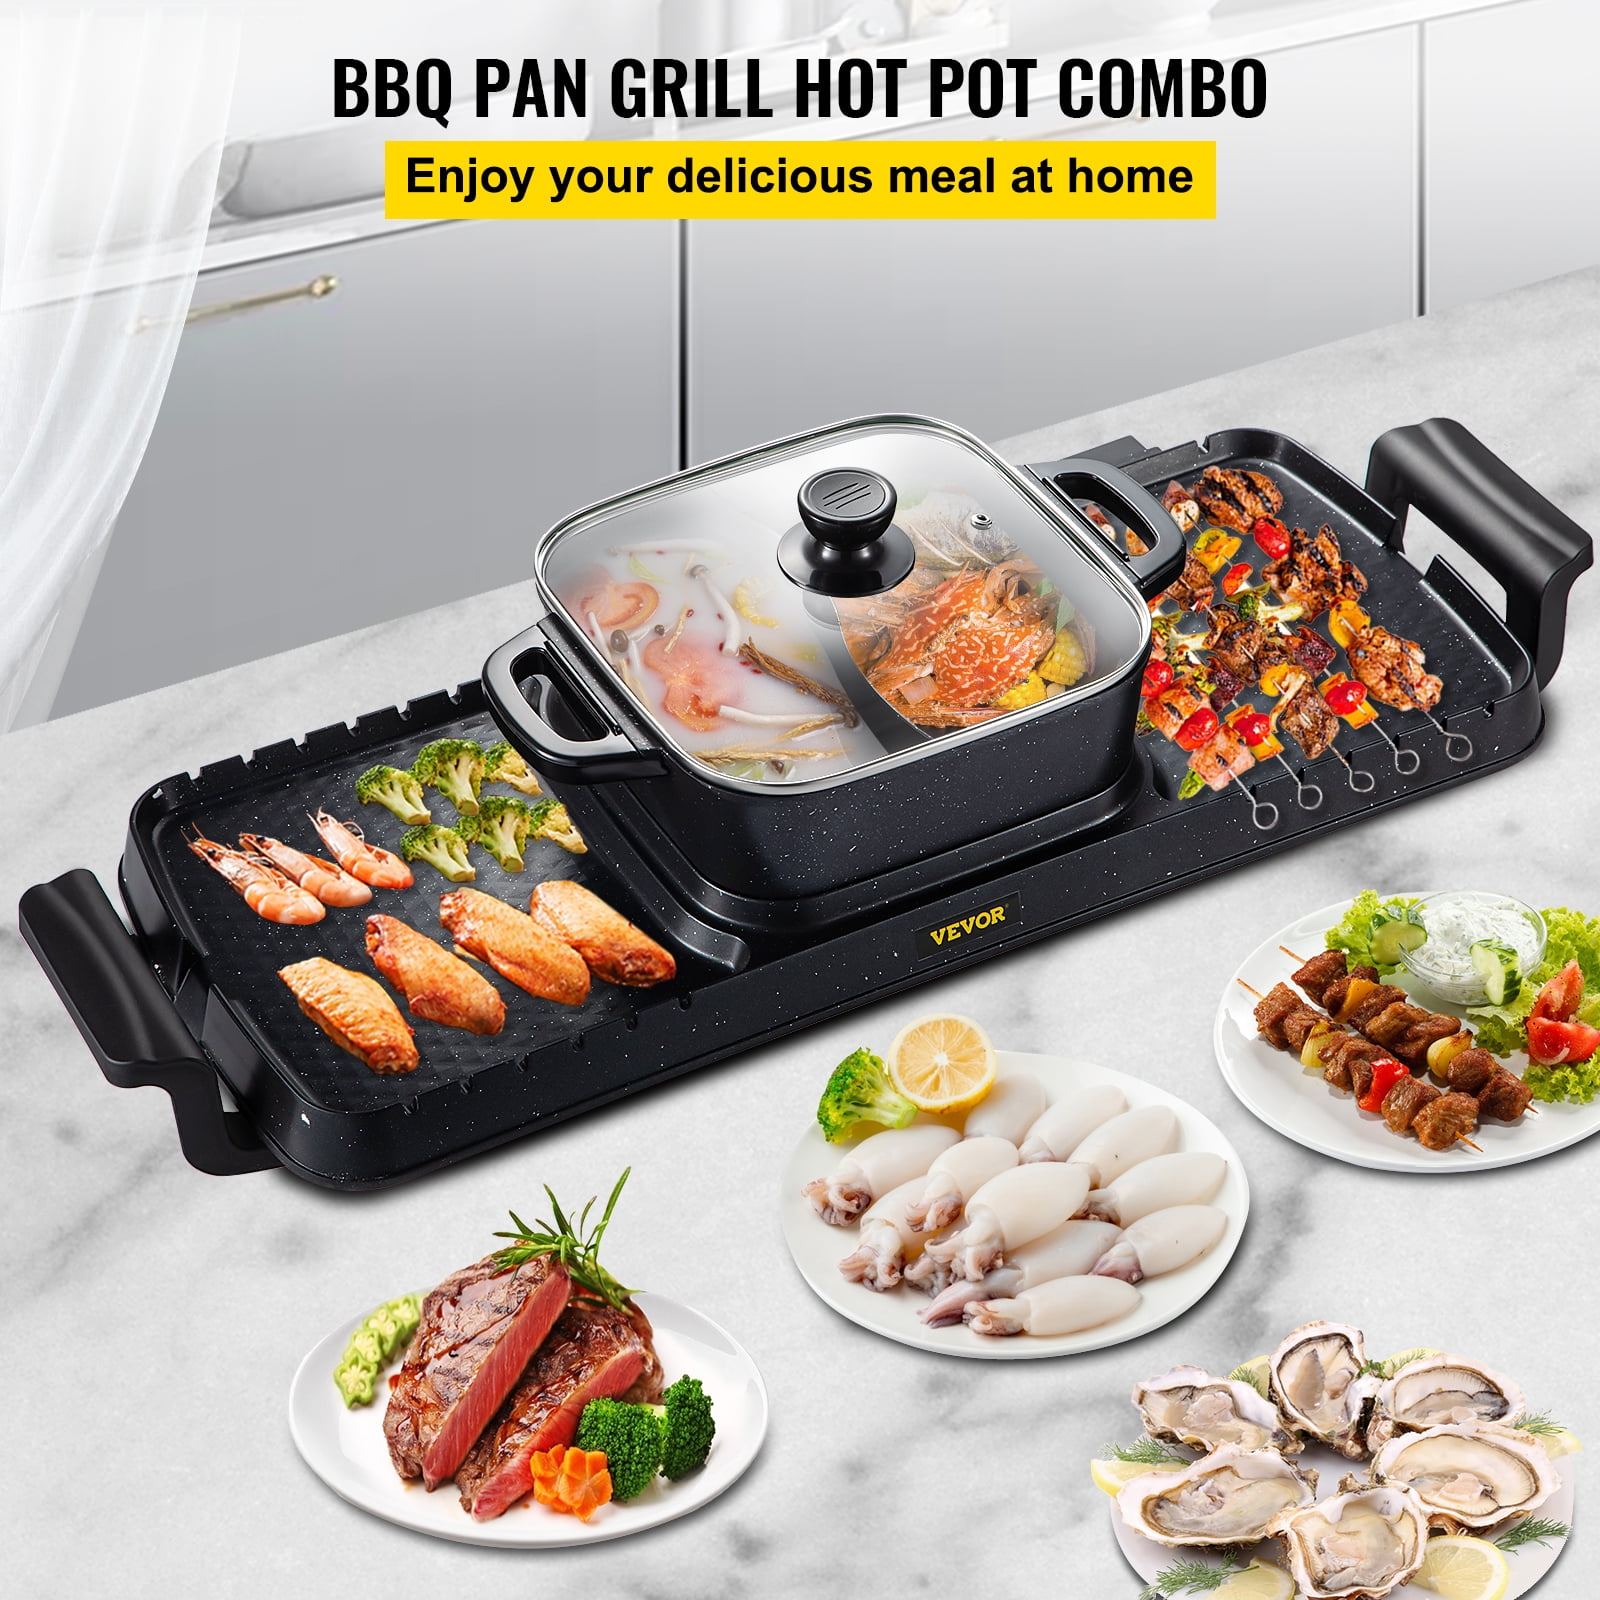 Cncest 2200W 2 in 1 Electric Smokeless Grill and Hot Pot 110V Split Easy Cleaning Dual Temperature Control Hot Pot with Grill, Size: 50